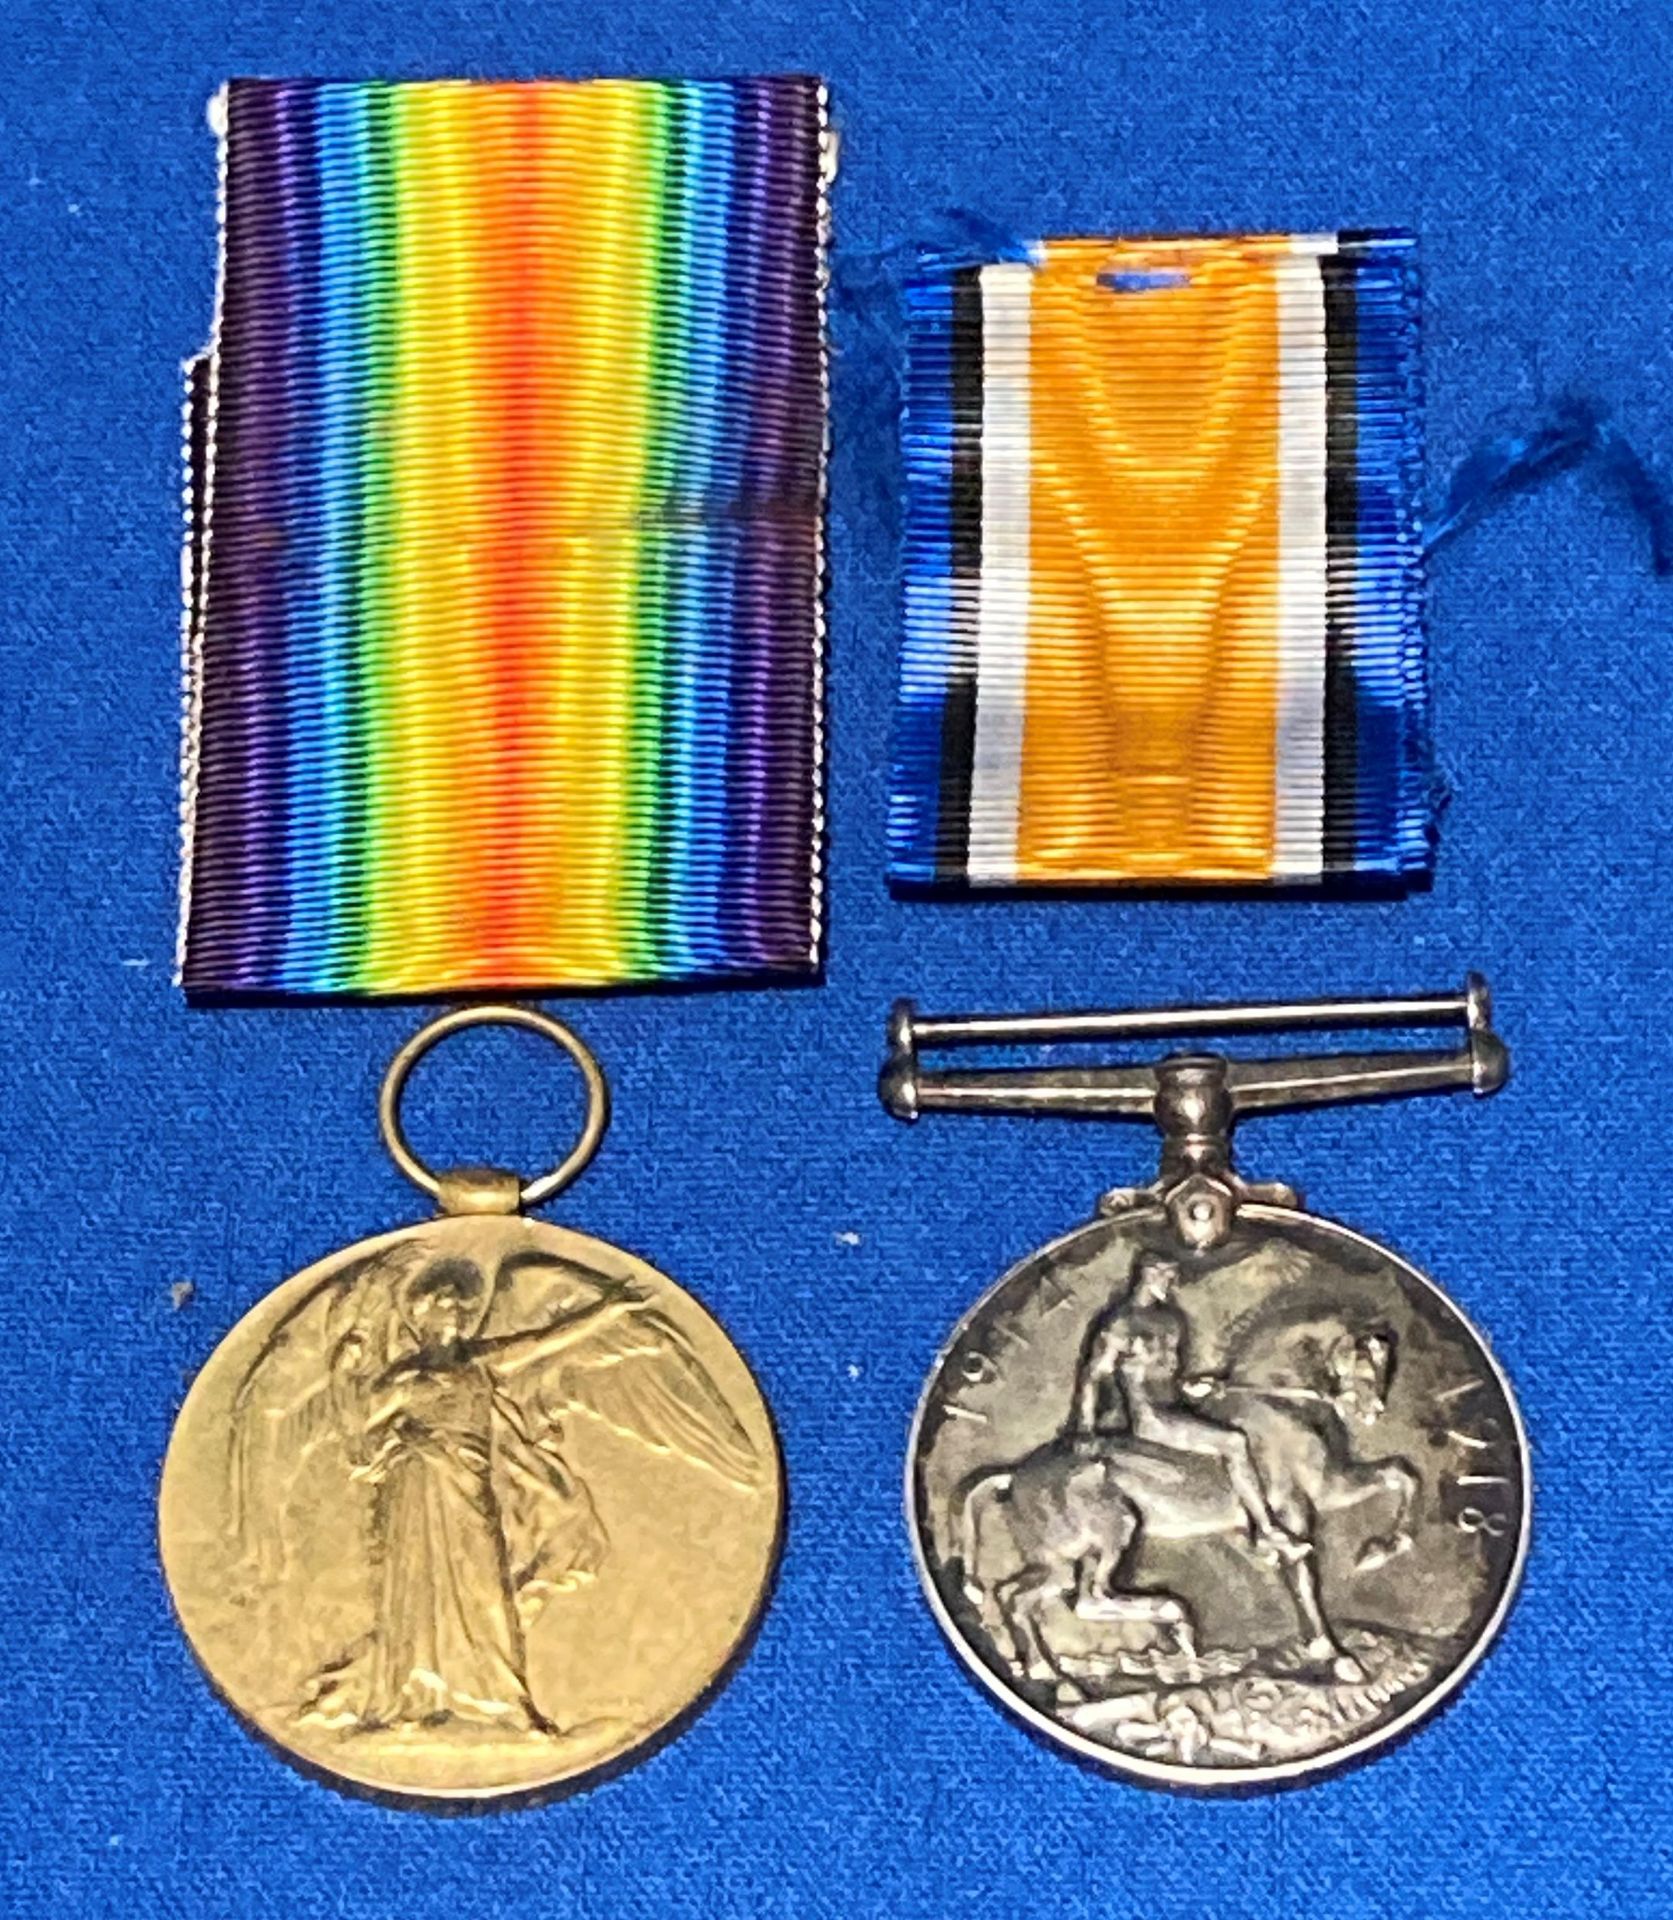 Two First World War medals to 20247 Pte. JF Hornby W. - Image 2 of 6